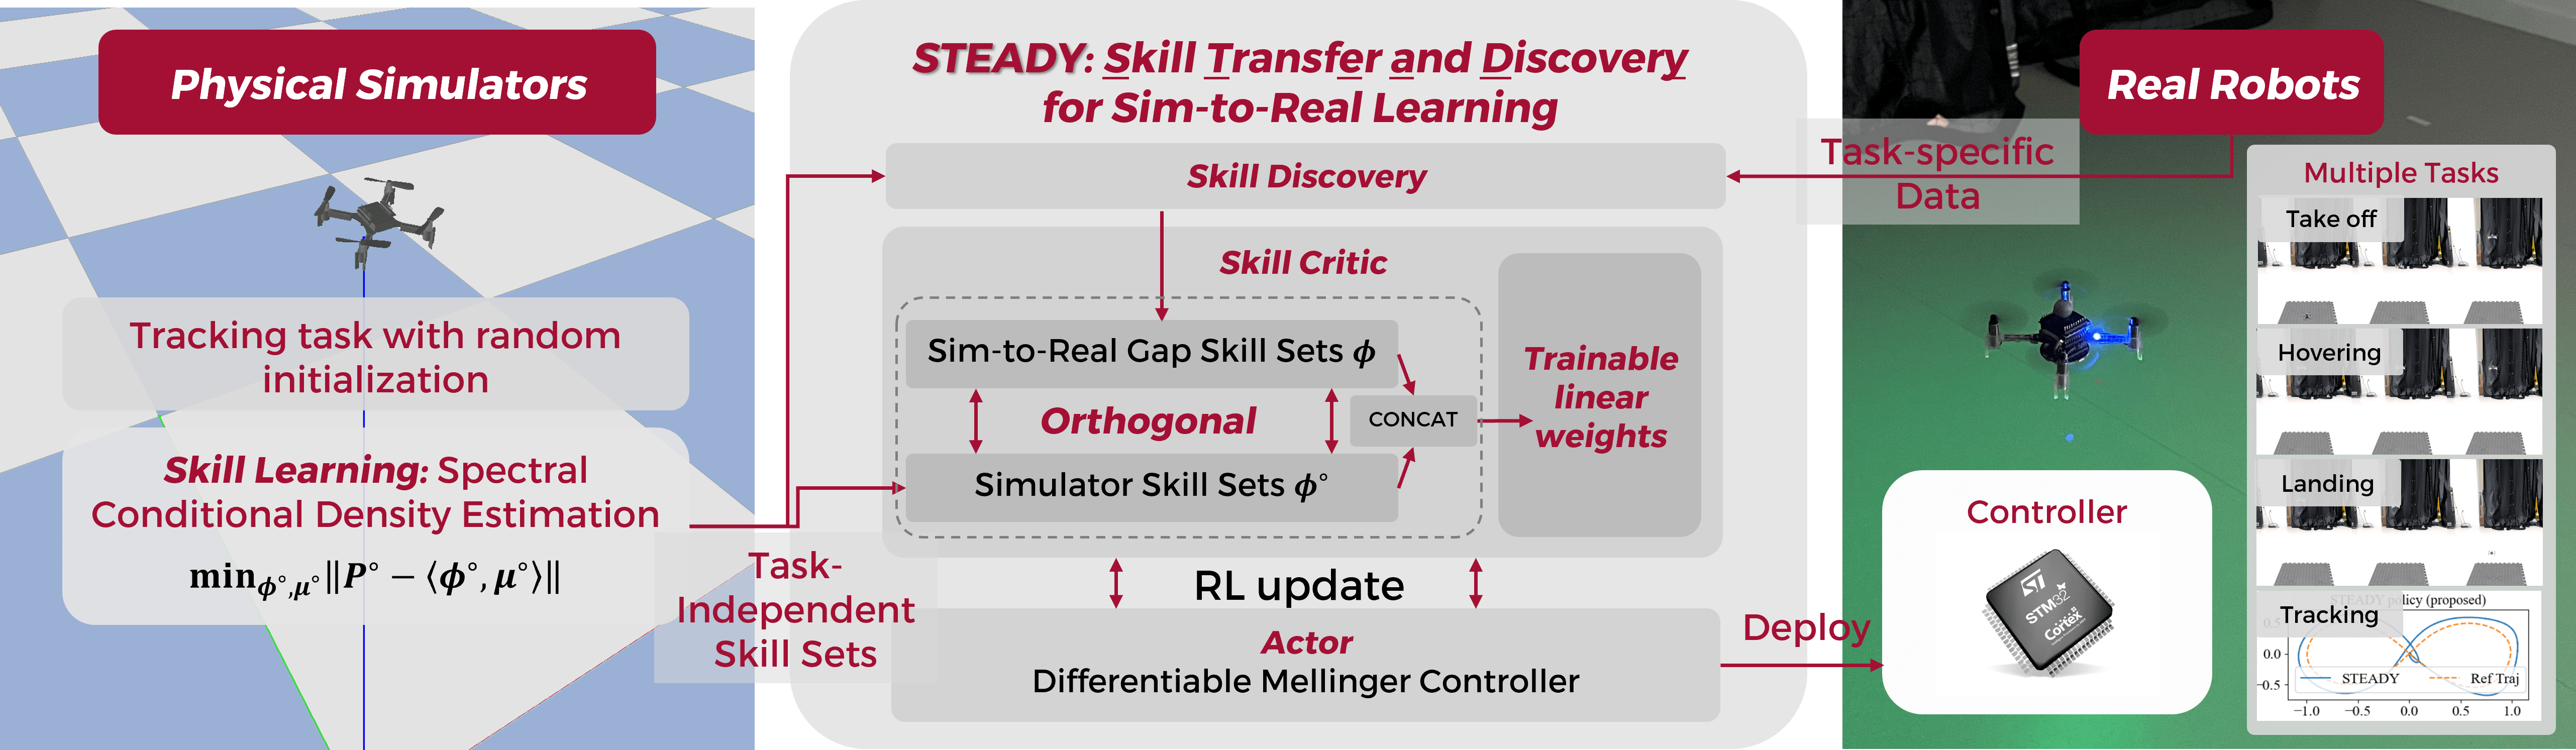 Skill Transfer and Discovery for Sim-to-Real Learning: A Representation-Based Viewpoint